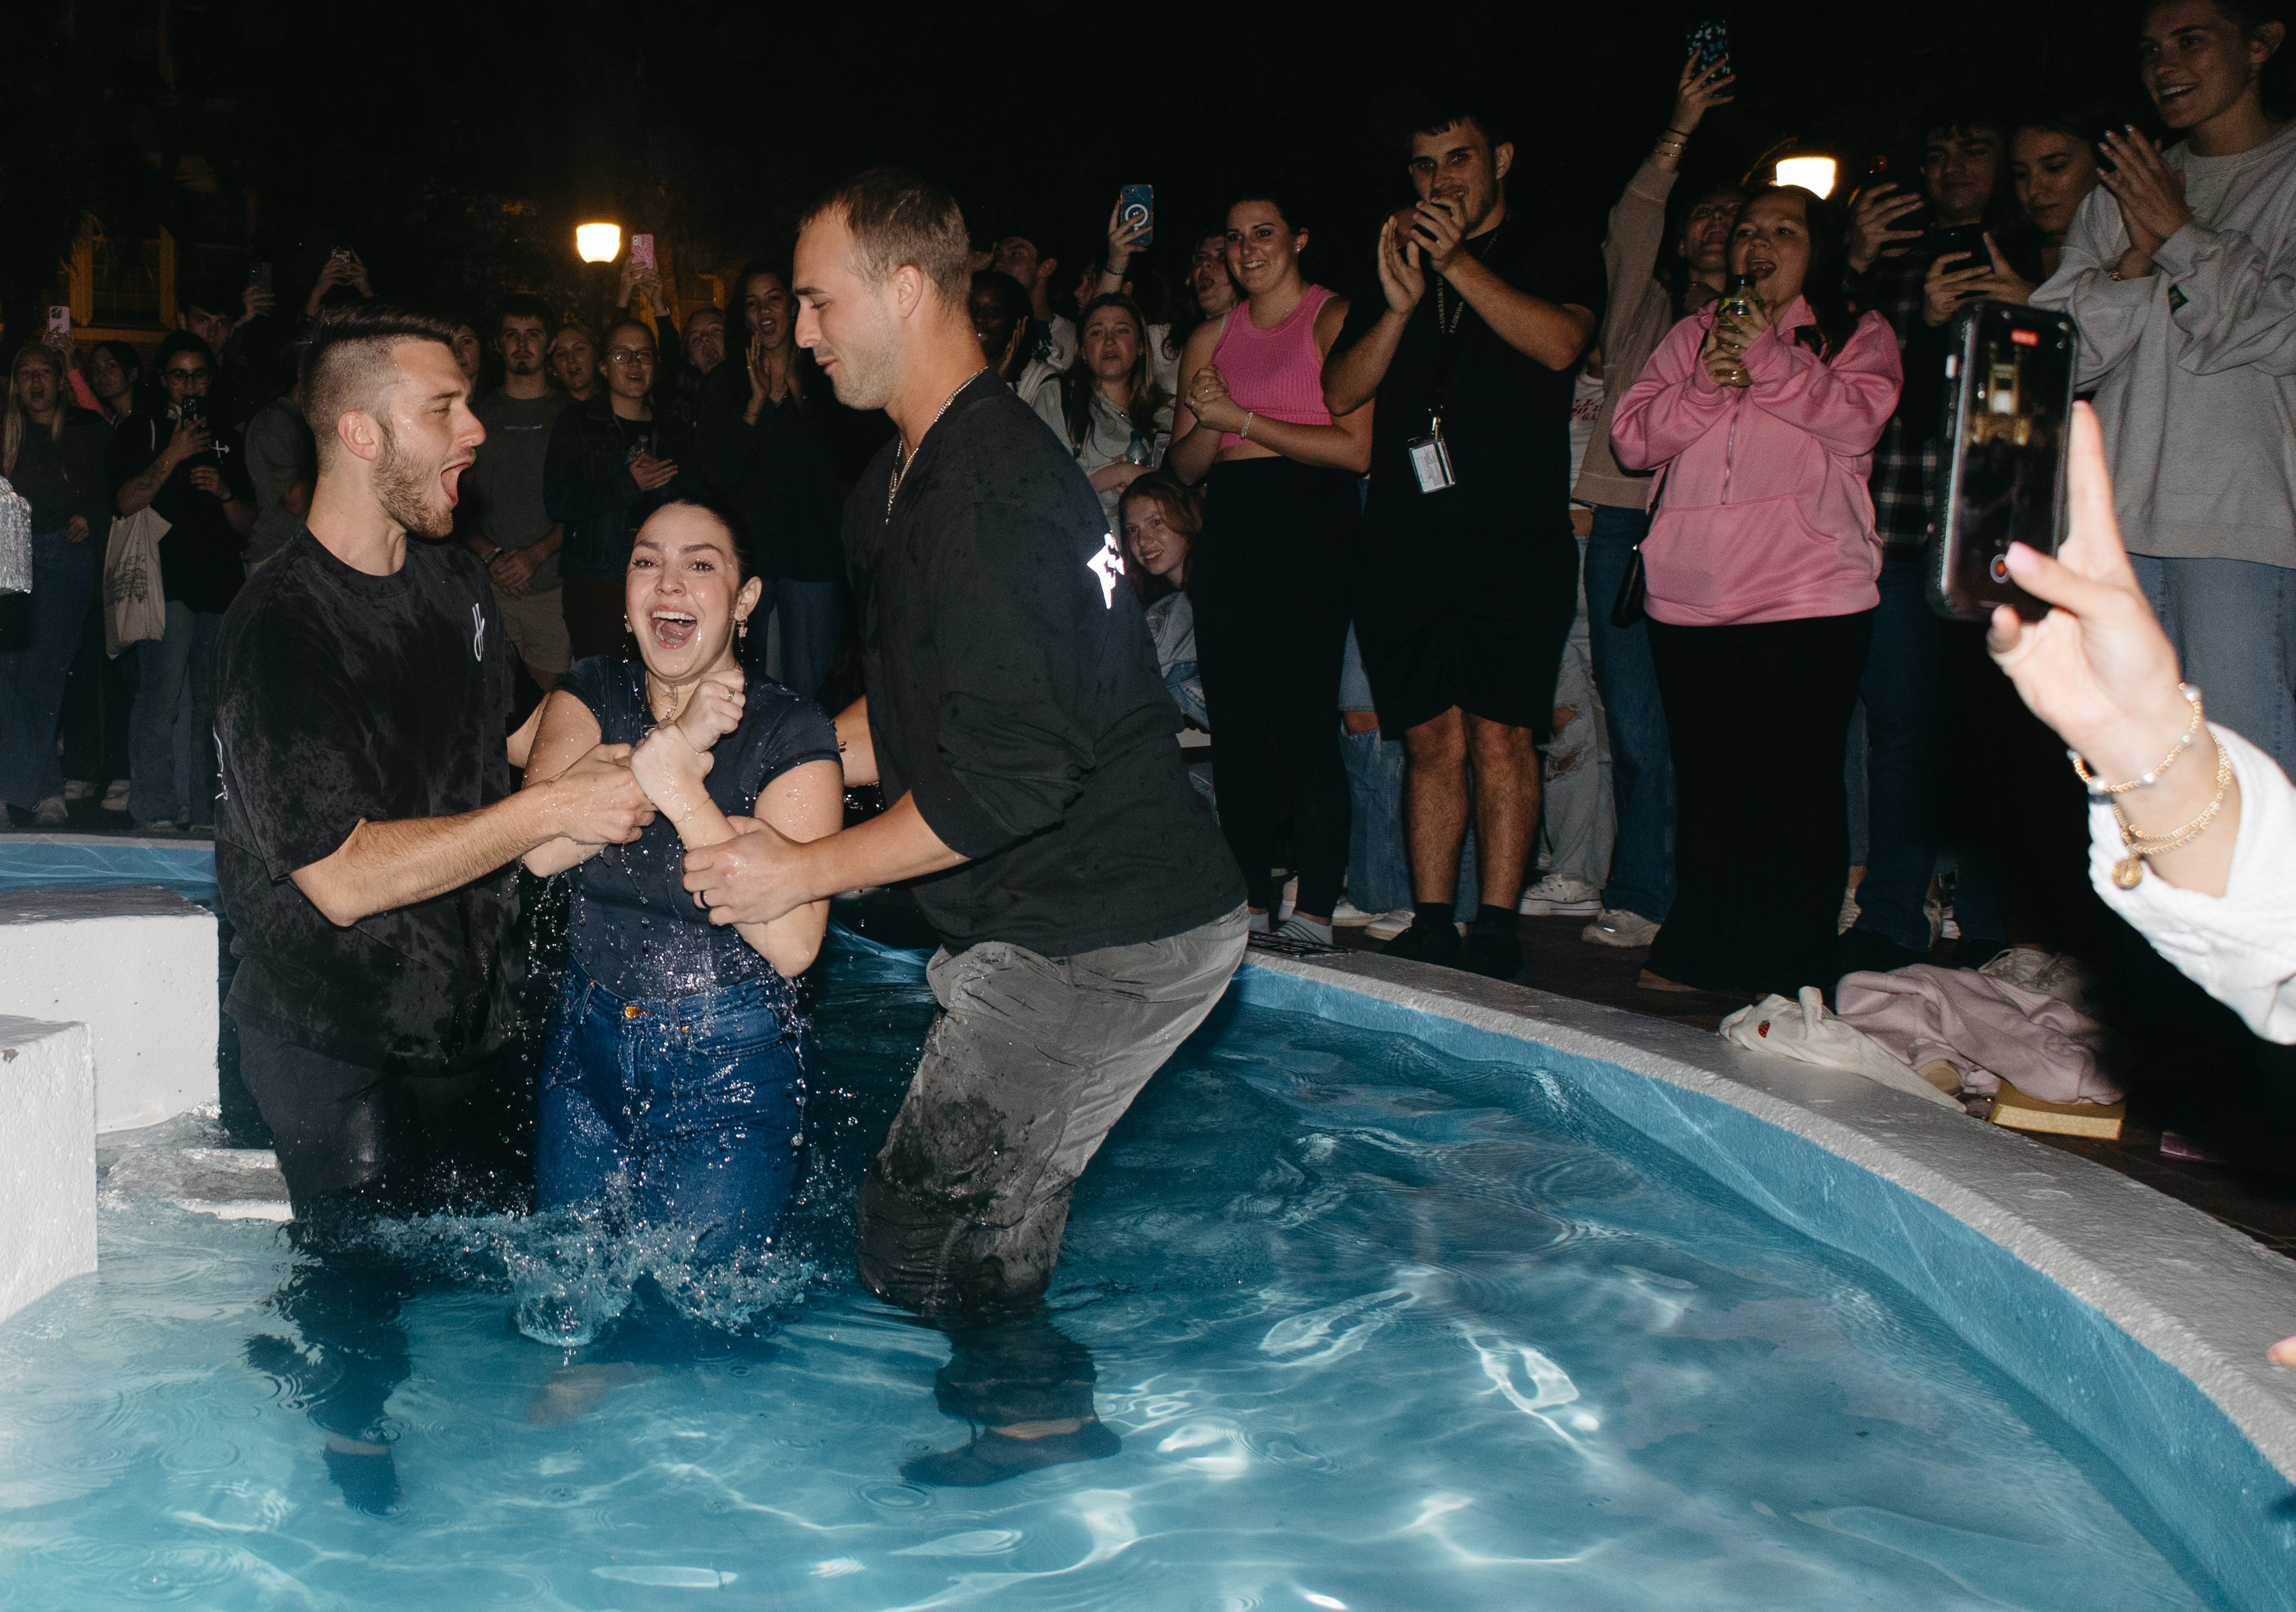 Young woman being baptized by two men